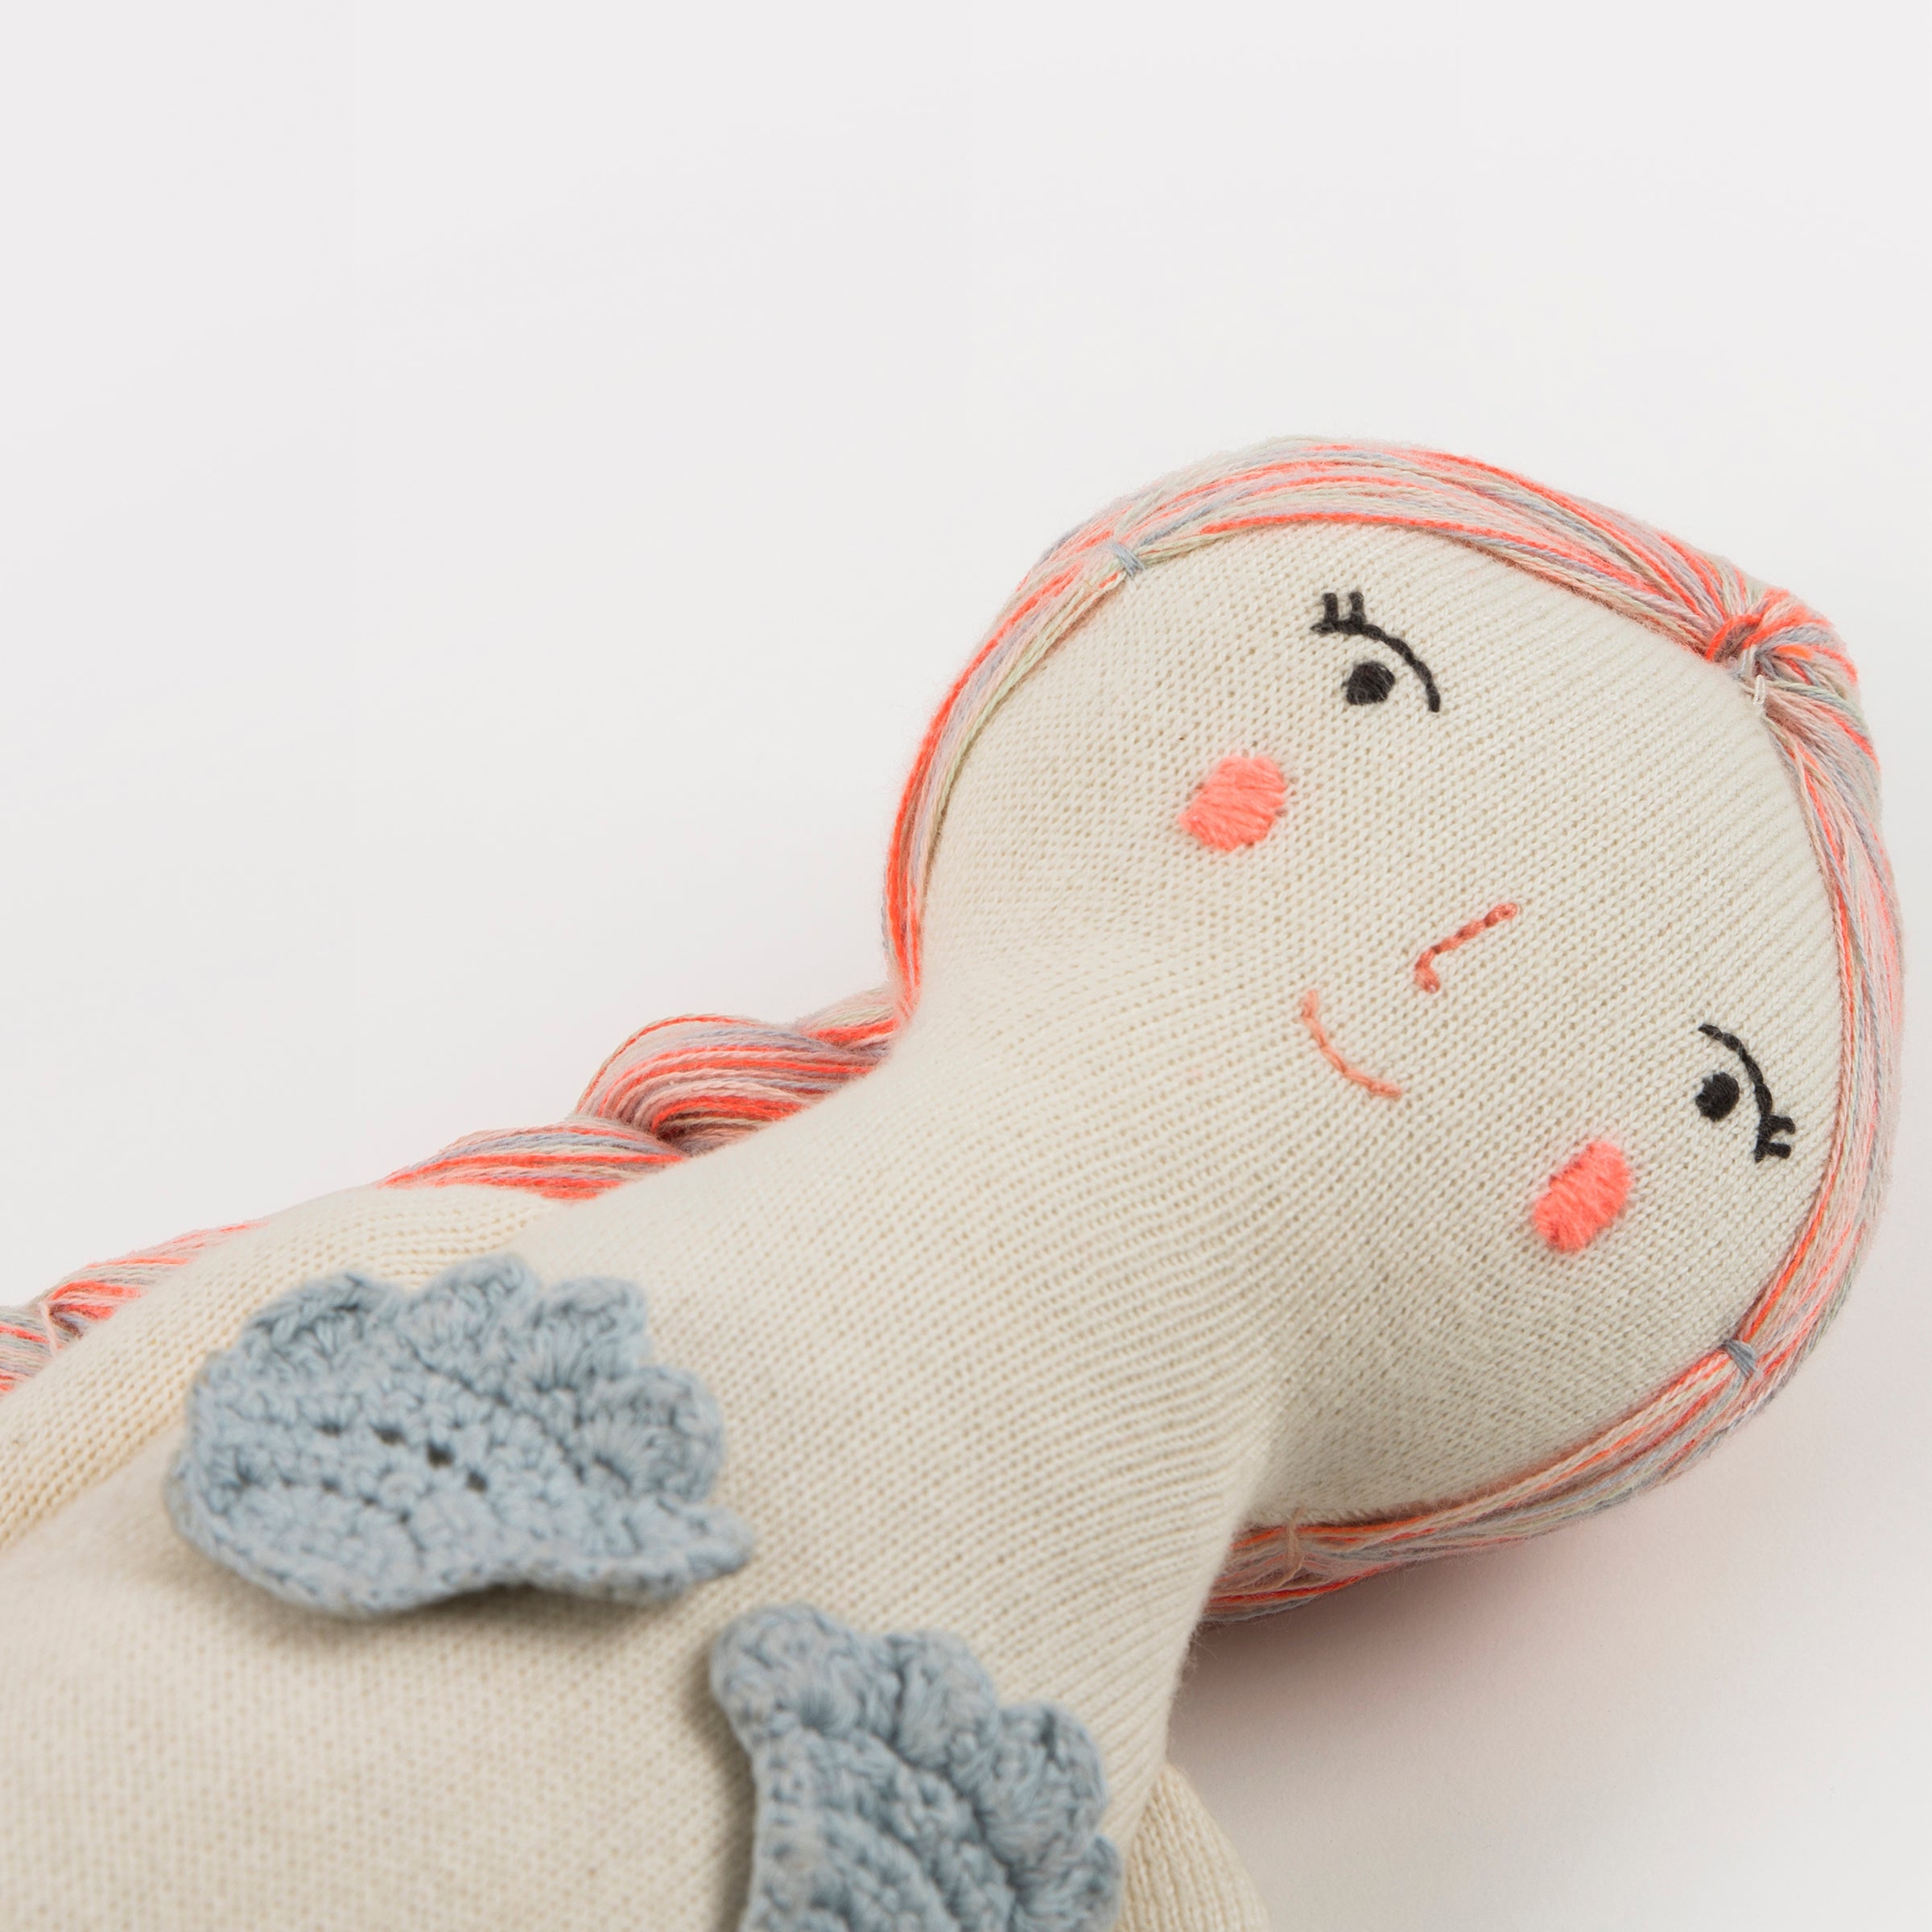 Our mermaid toy is a cotton toy with beautiful embellishments.